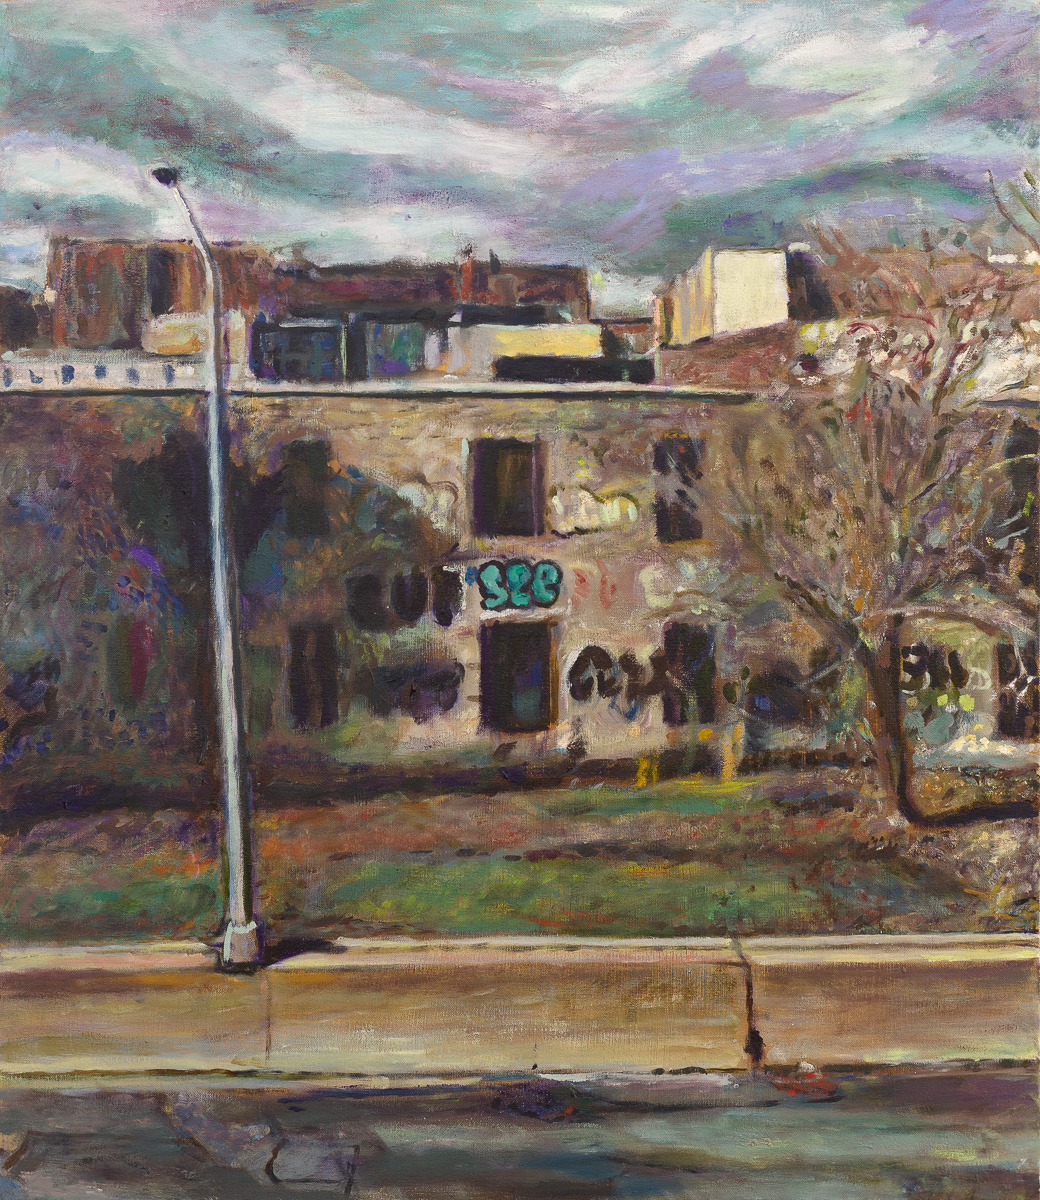 Oil painting of the old Putnam railroad next to the Major Deegan Expressway in the Bronx, showing a landscape poised for ecological transformation, with buildings and a street lamp under a dynamic sky.